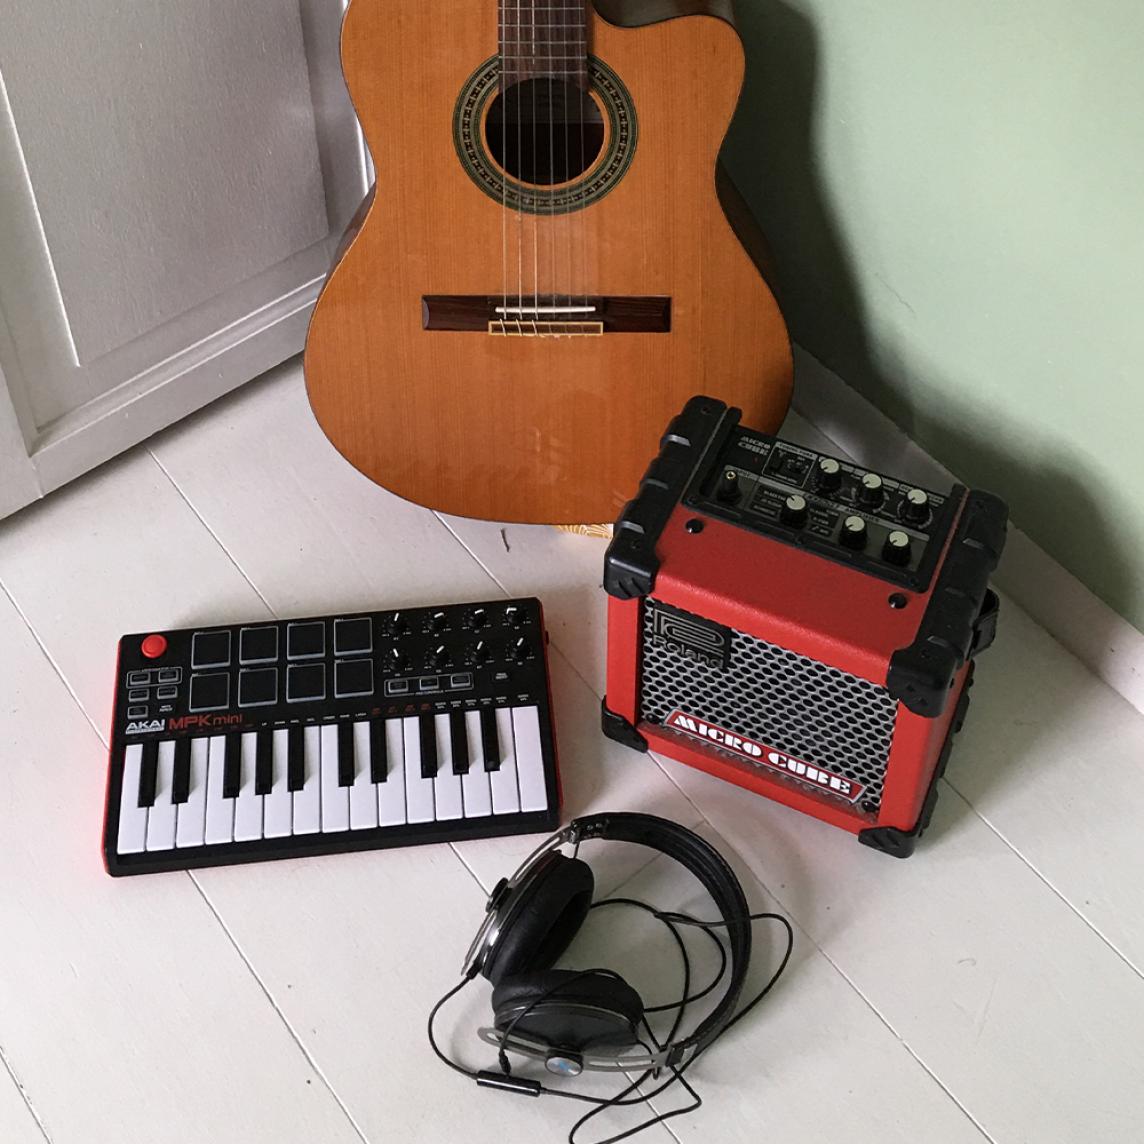 A synthesizer, guitar and guitar amp on a white floor